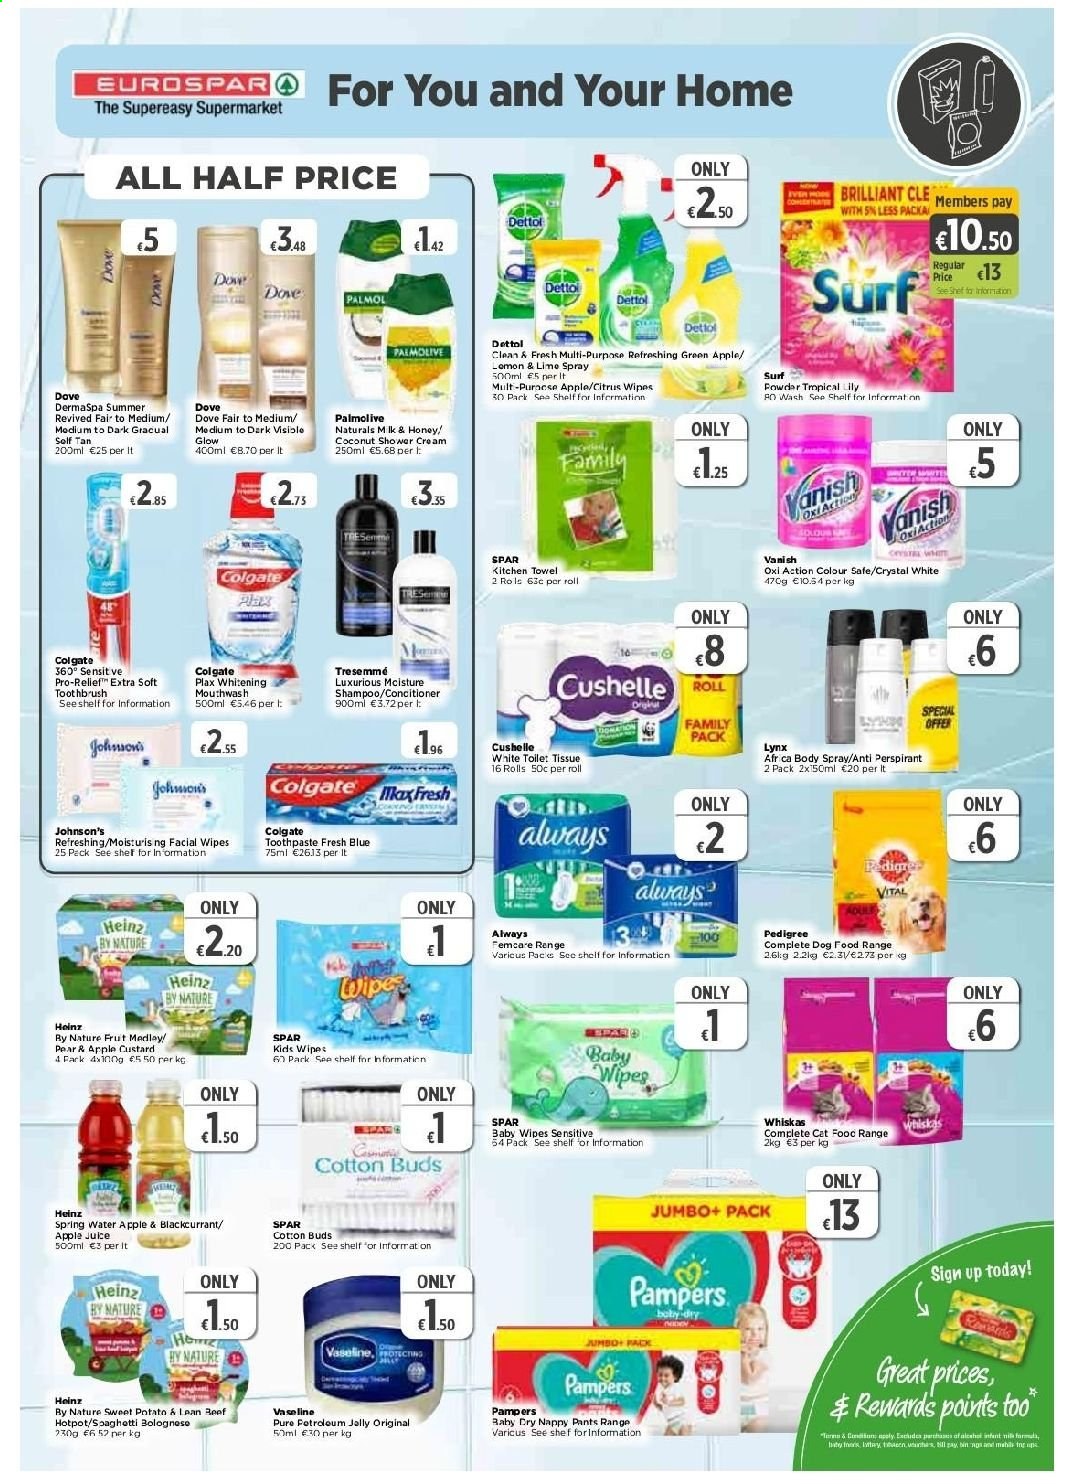 thumbnail - EUROSPAR offer  - 27.05.2021 - 16.06.2021 - Sales products - custard, Heinz, honey, juice, wipes, Pampers, pants, baby wipes, nappies, Johnson's, Dettol, Dove, tissues, kitchen towels, Cushelle, Vanish, Surf, shampoo, Palmolive, Vaseline, Colgate, toothbrush, toothpaste, mouthwash, Plax, TRESemmé, body spray, bin, animal food, dog food, Whiskas, Pedigree. Page 7.